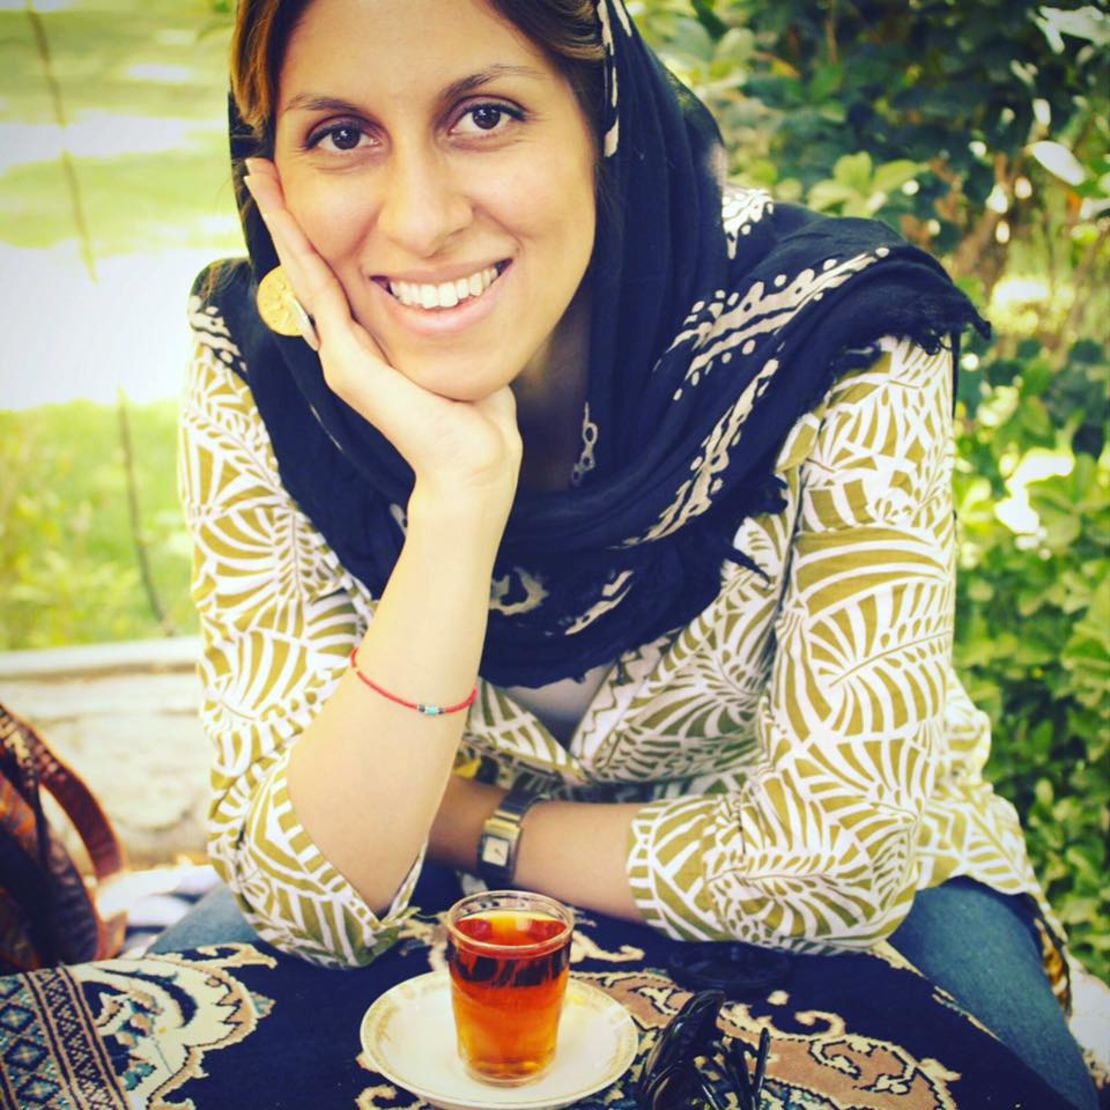 Nazanin Zaghari-Ratcliffe is being held in an Iranian prison.